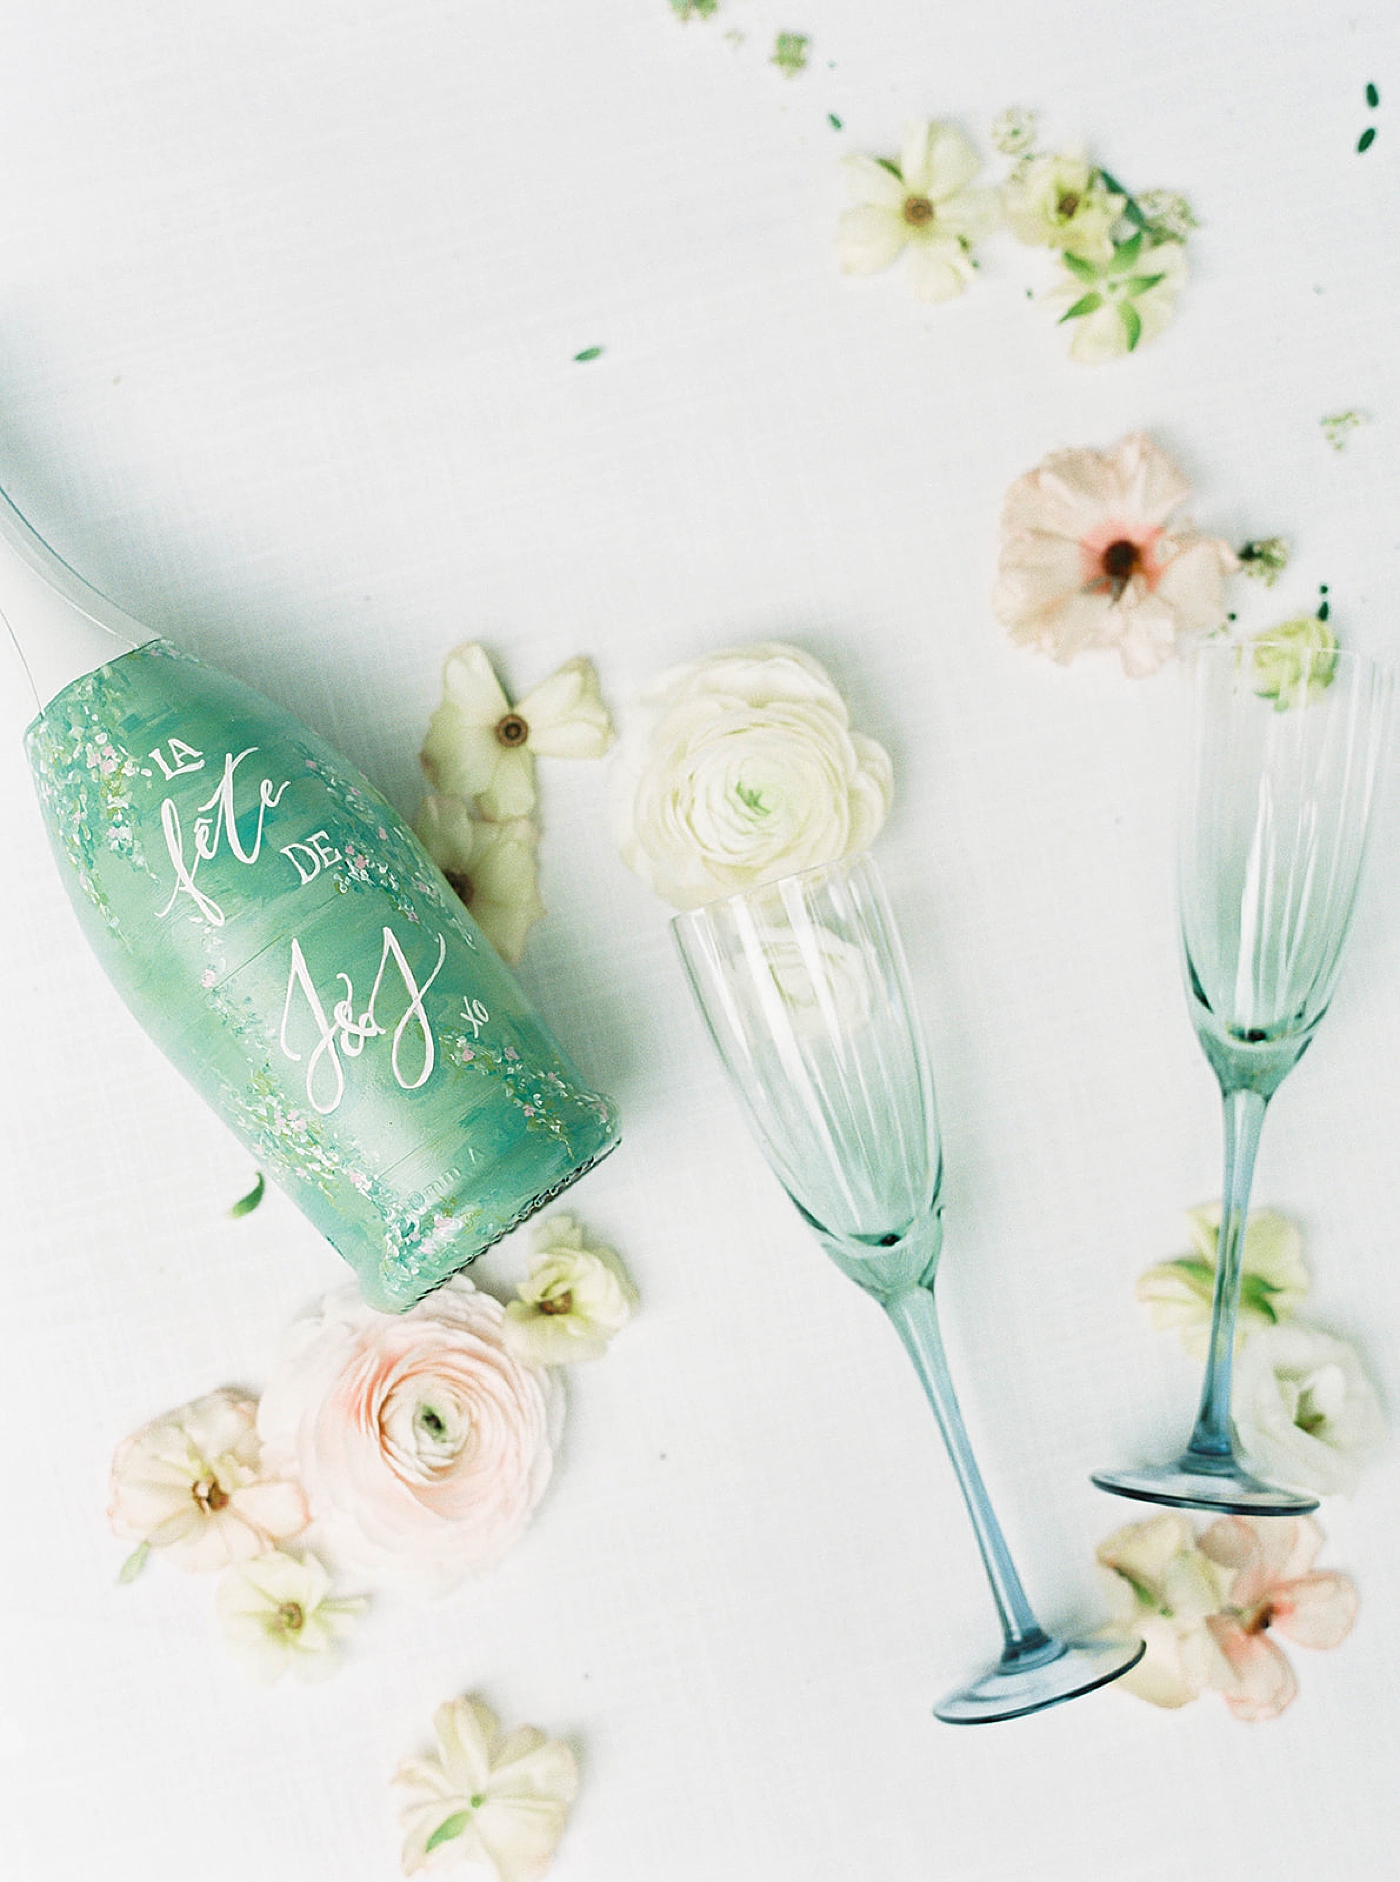 Painted champagne bottle with blue flutes | Charleston Photography Workshop with Carters Event Co